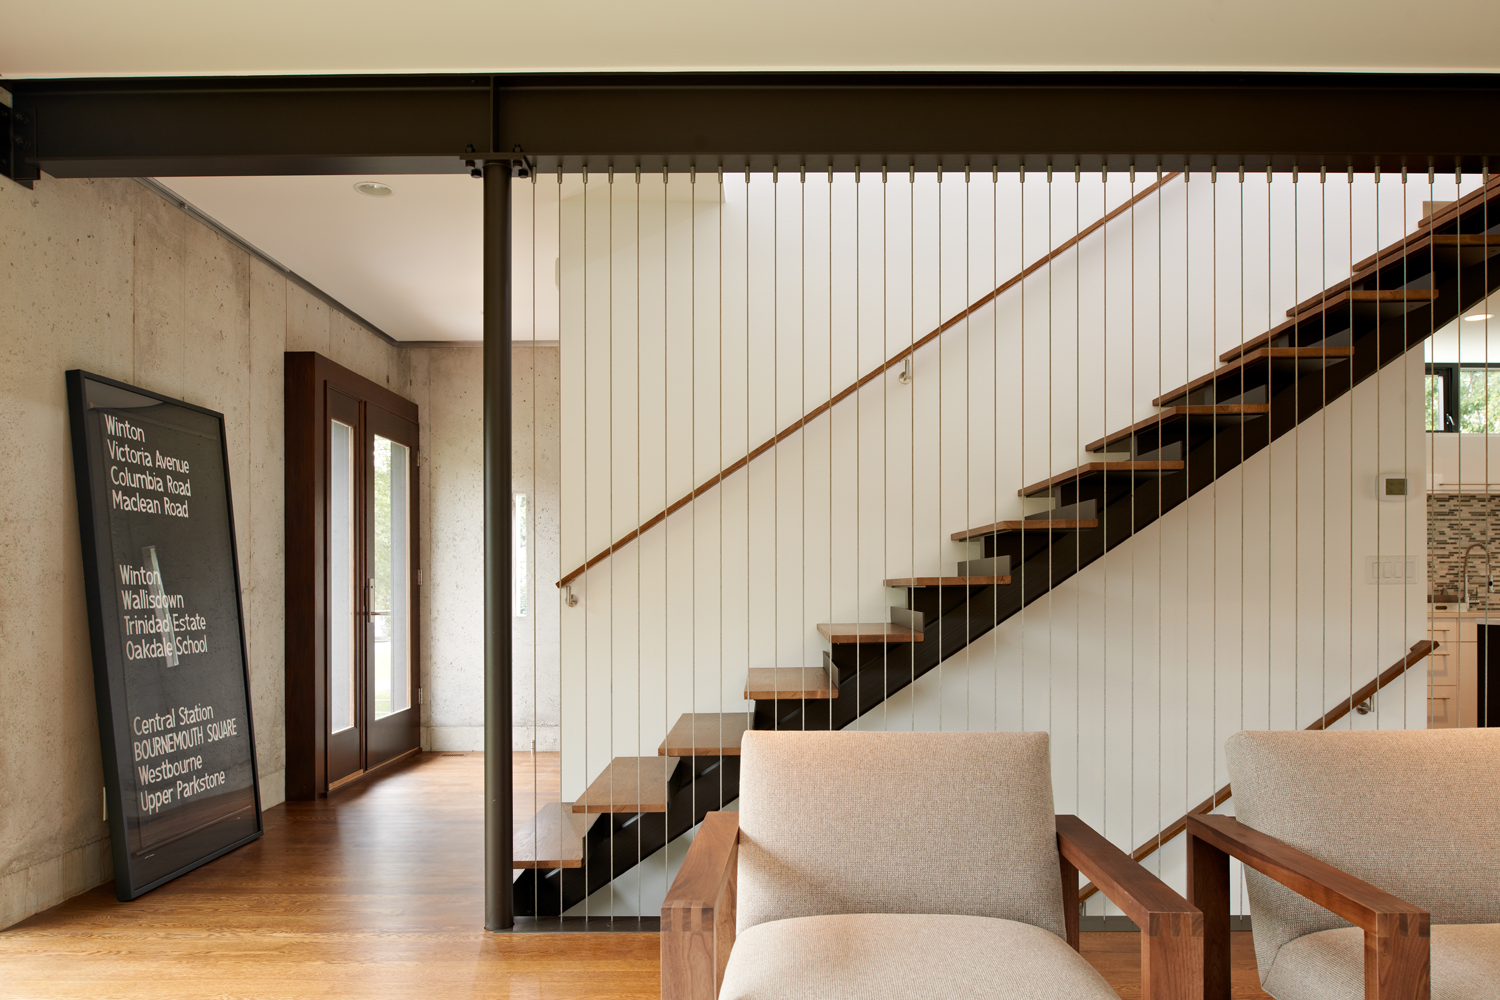 Custon open stair with cable rail by Christian Dean Architecture